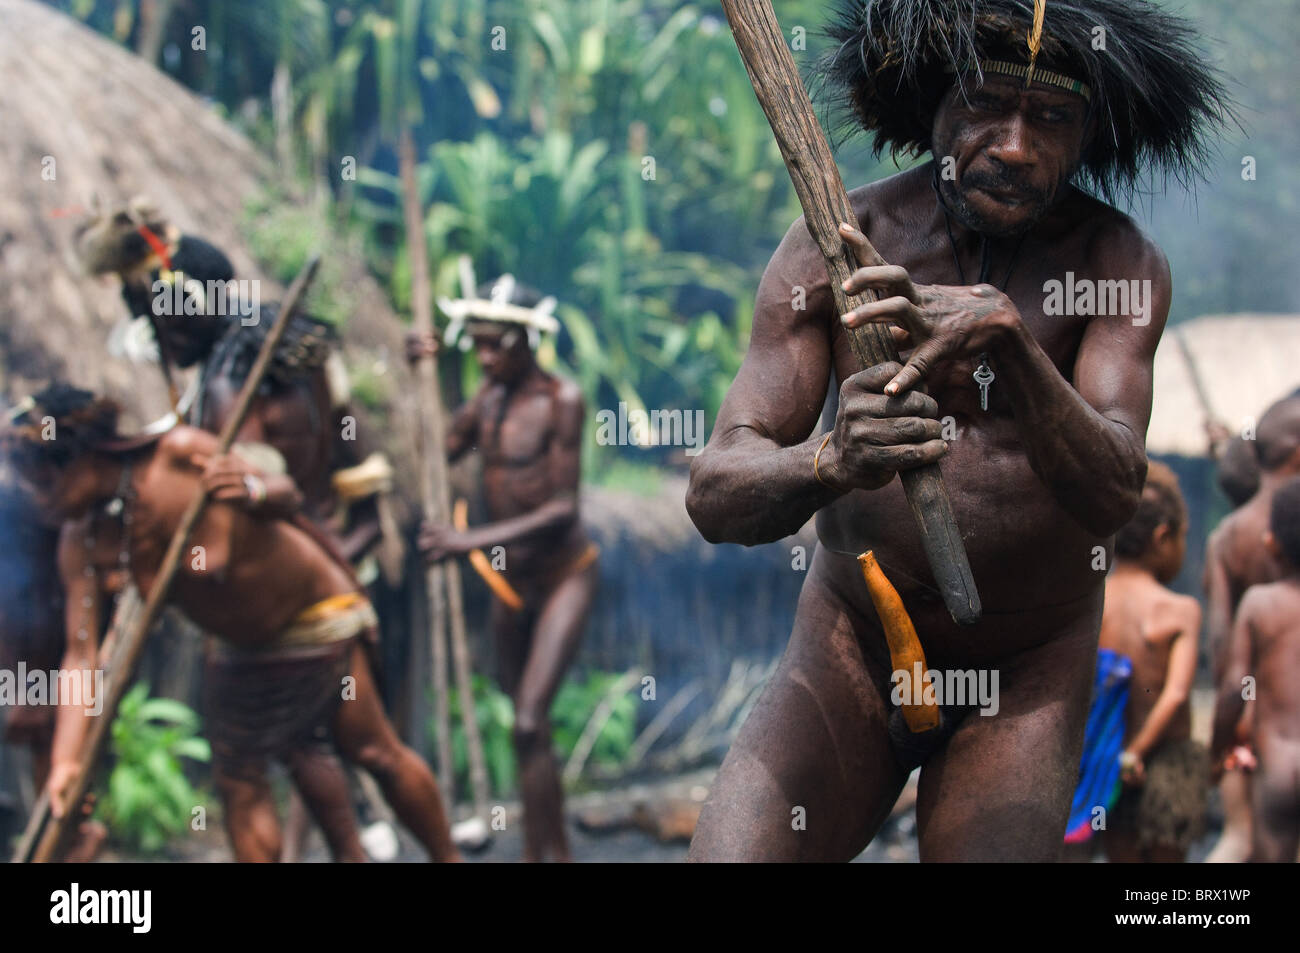 - Go away! The Papuan banishes from the village, swinging a stick. Indonesia. Papua New Guinea. Village of people Dani Dugum. Stock Photo